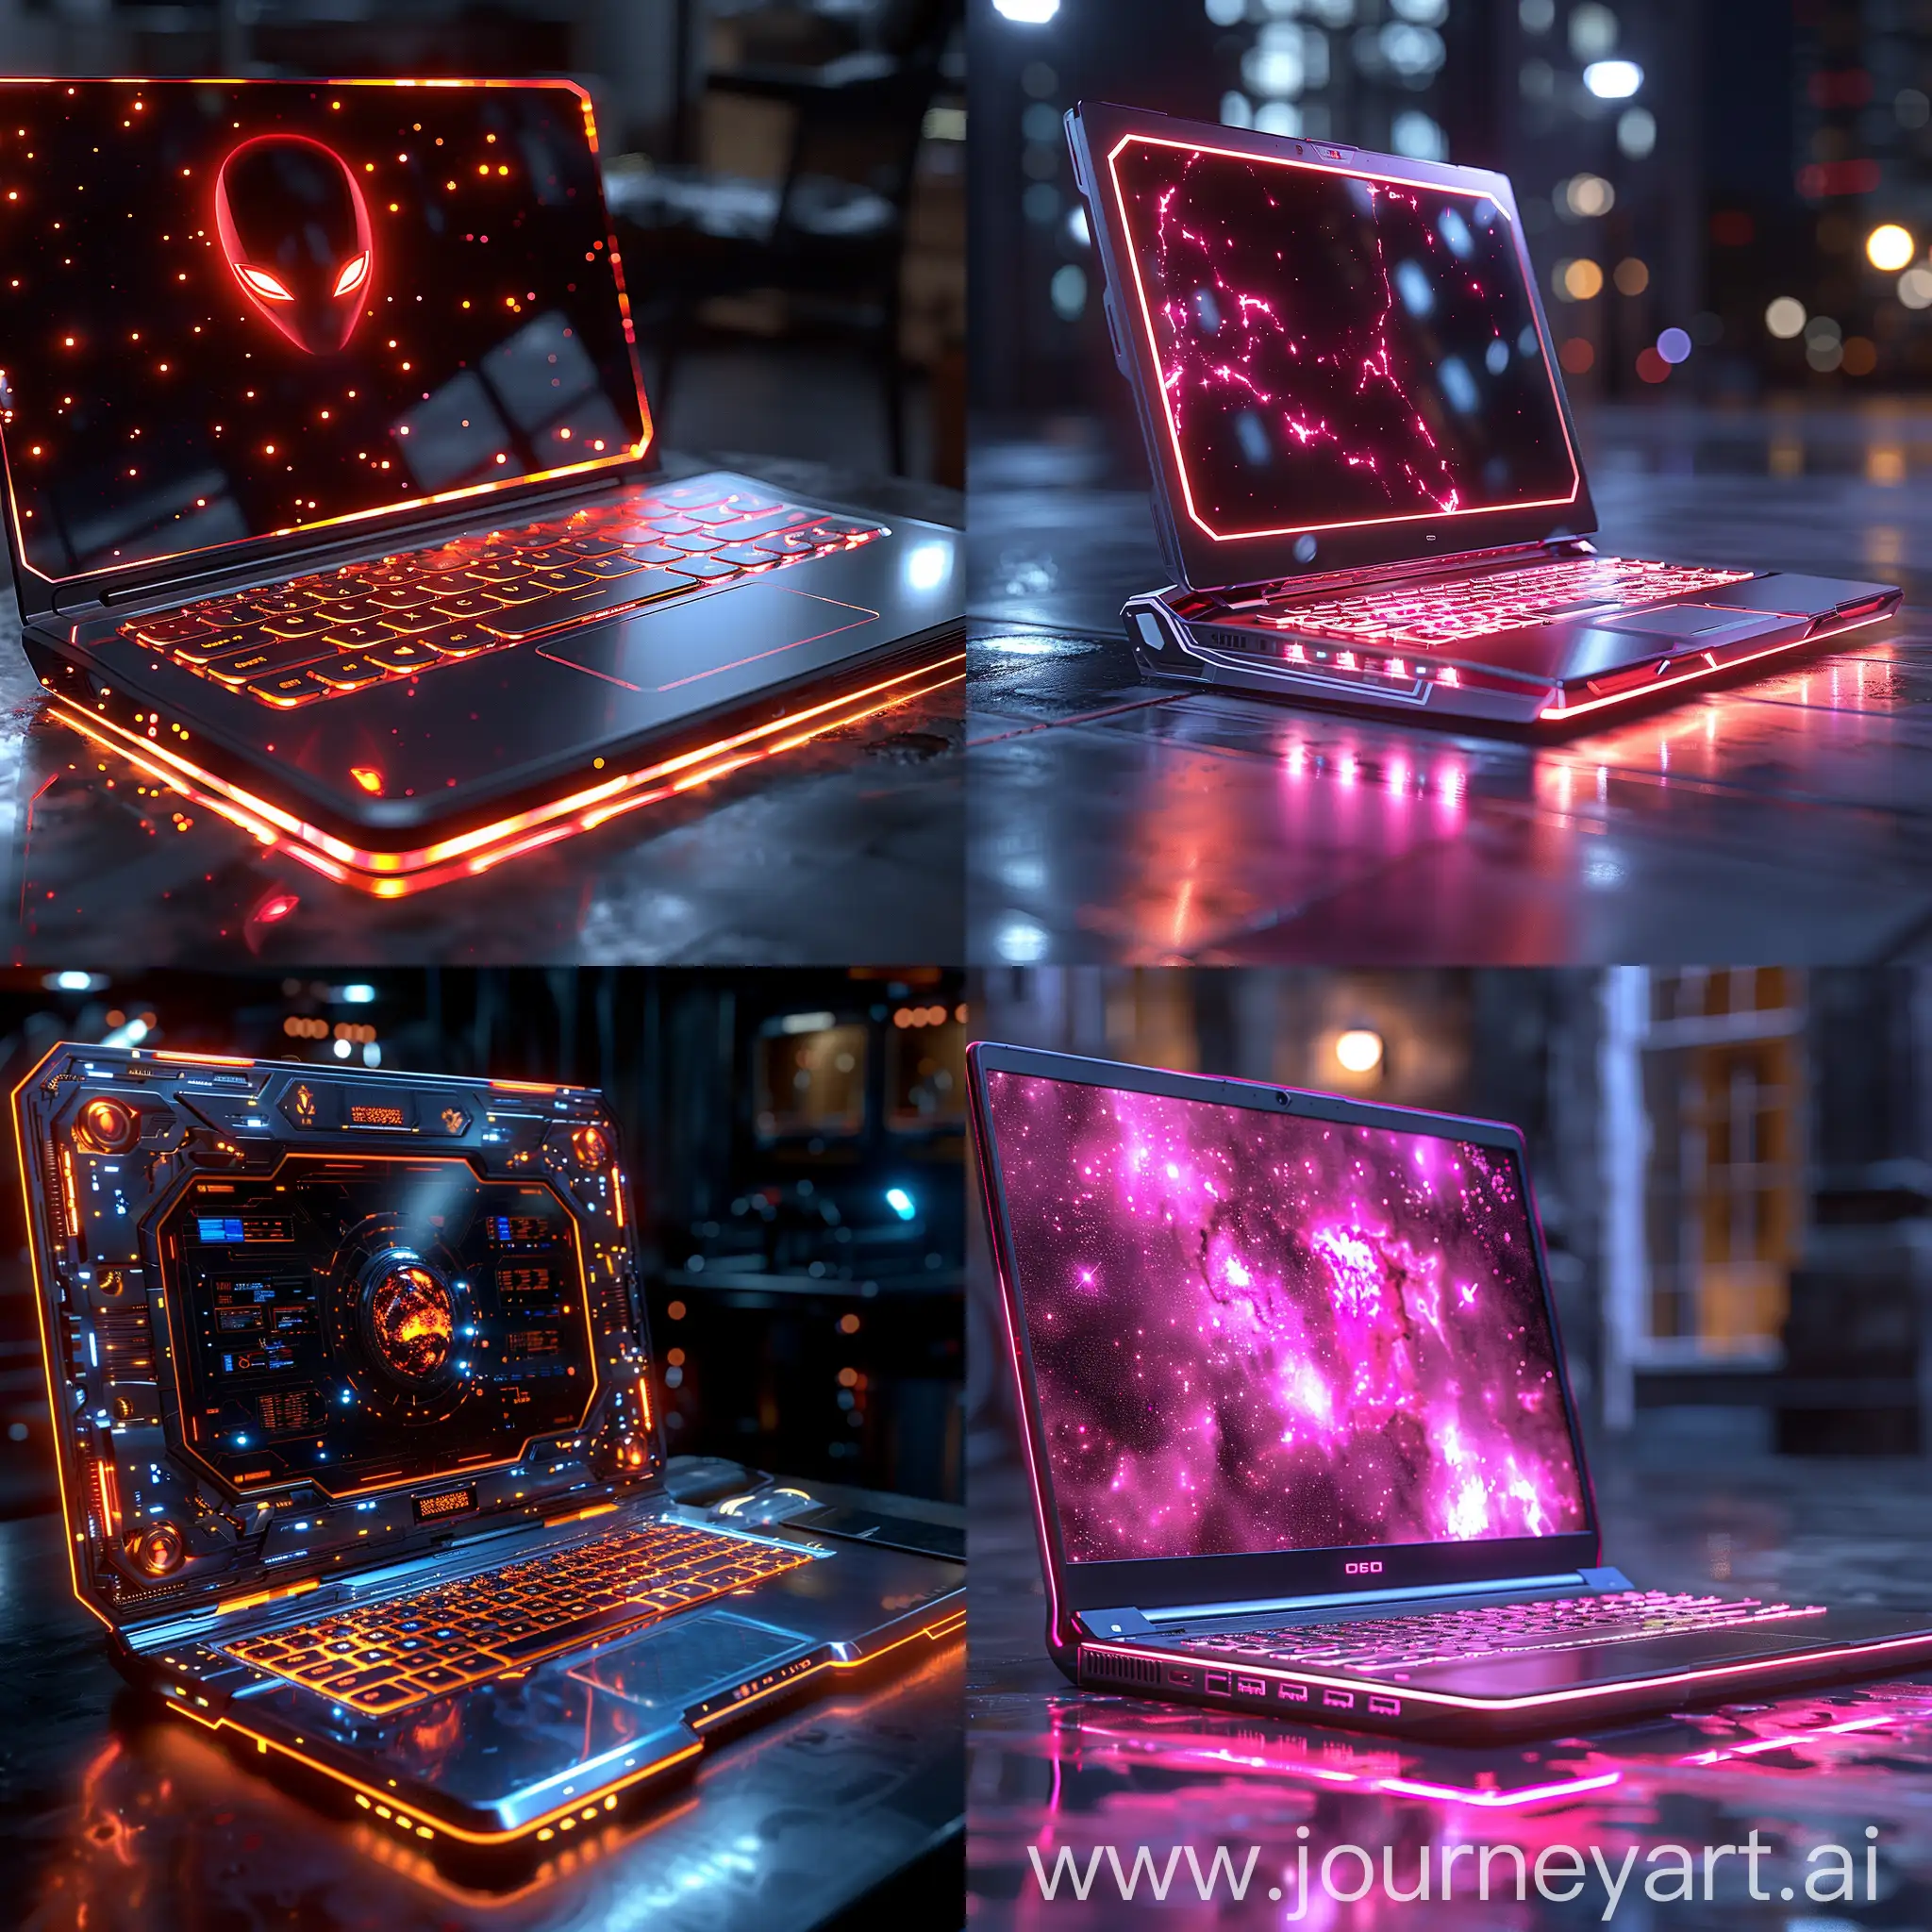 Futuristic-Laptop-with-Dynamic-Lighting-and-Futuristic-Styling